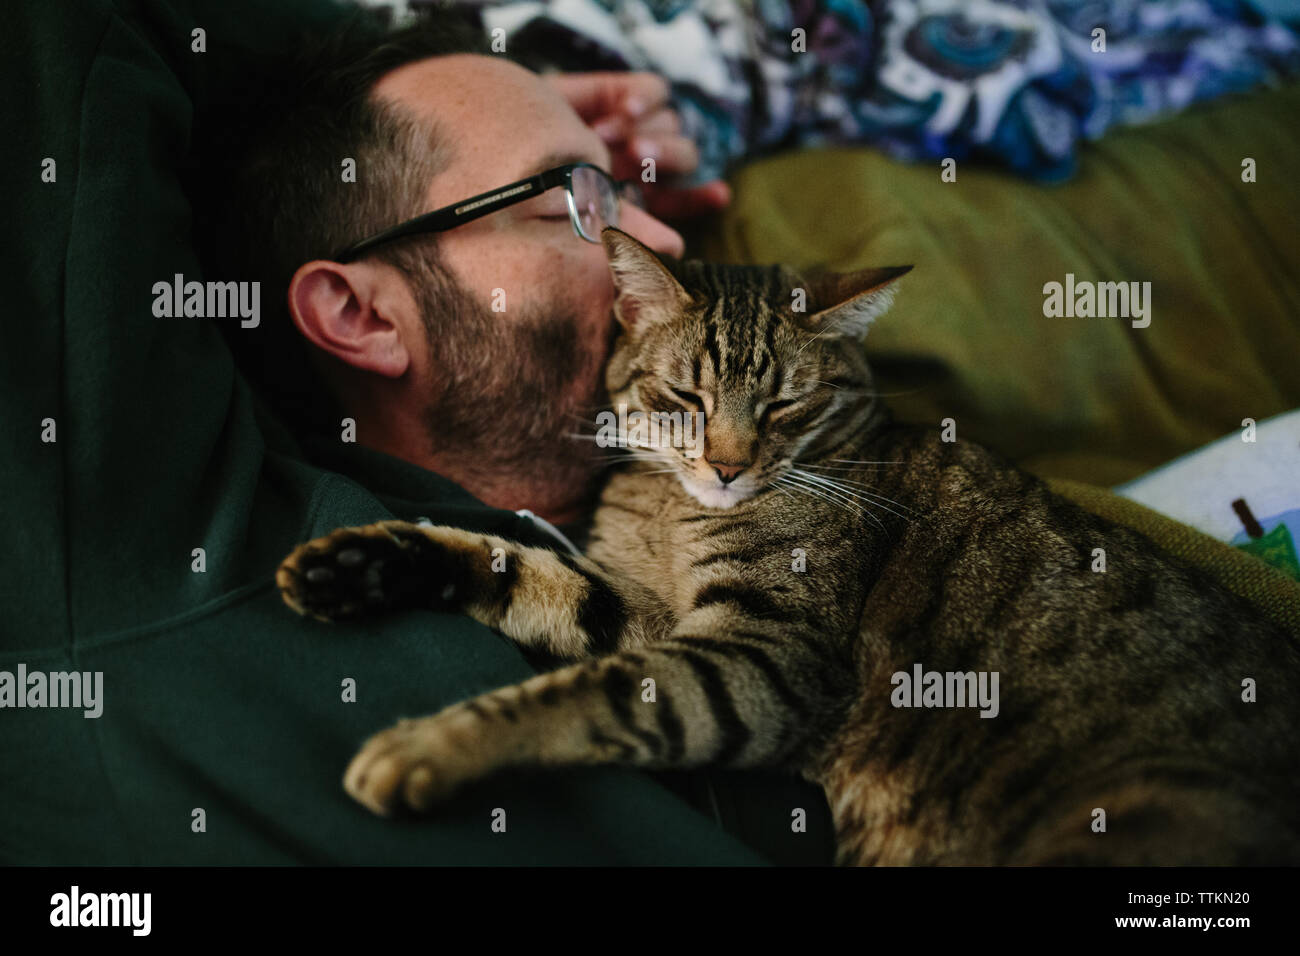 Close up of tabby cat asleep up against man's face Stock Photo